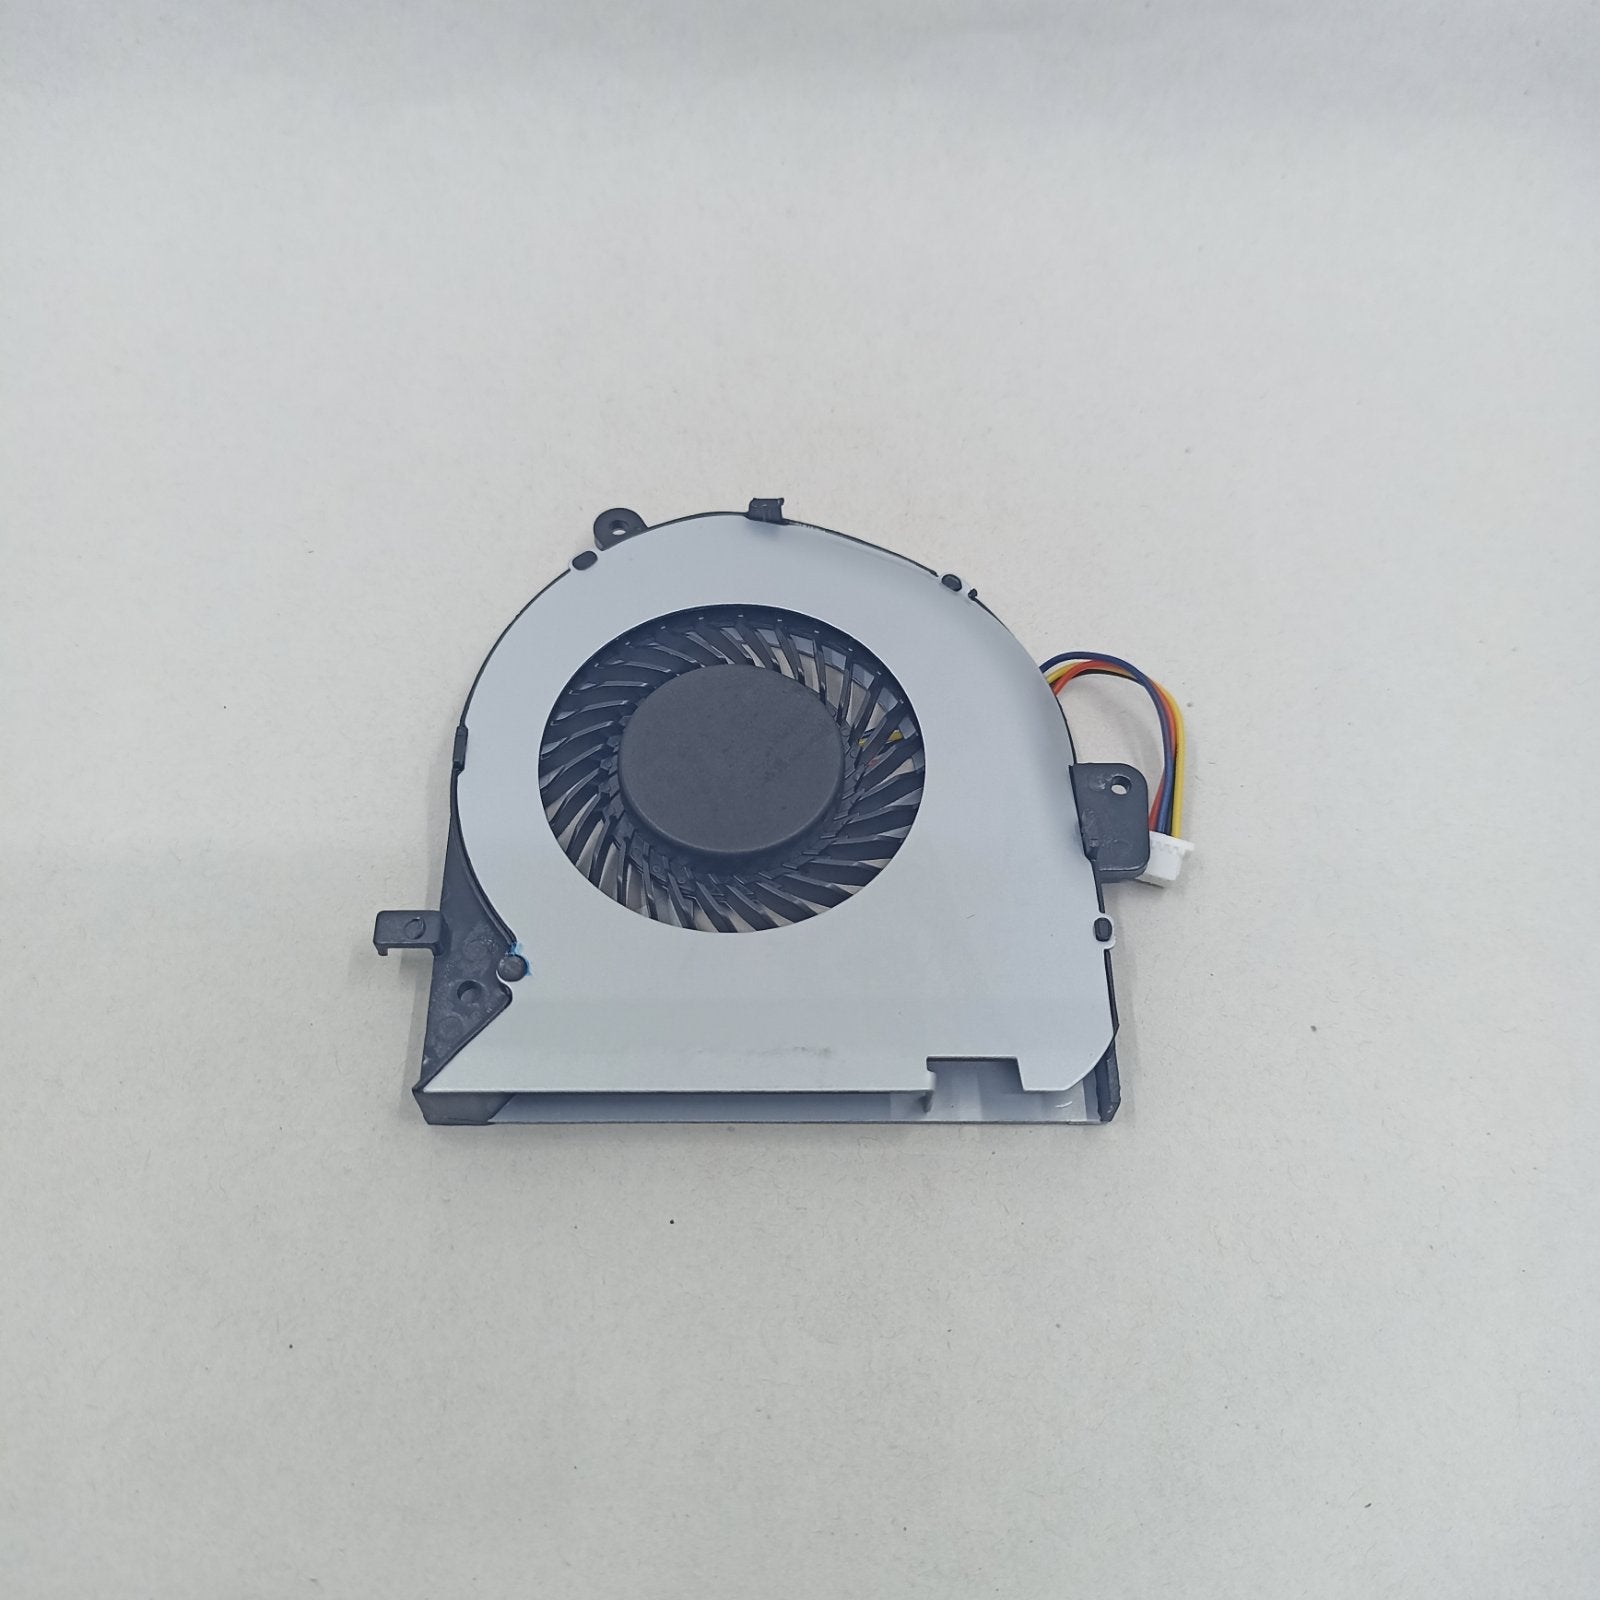 Replacement CPU Fan for Asus FX502VM WL